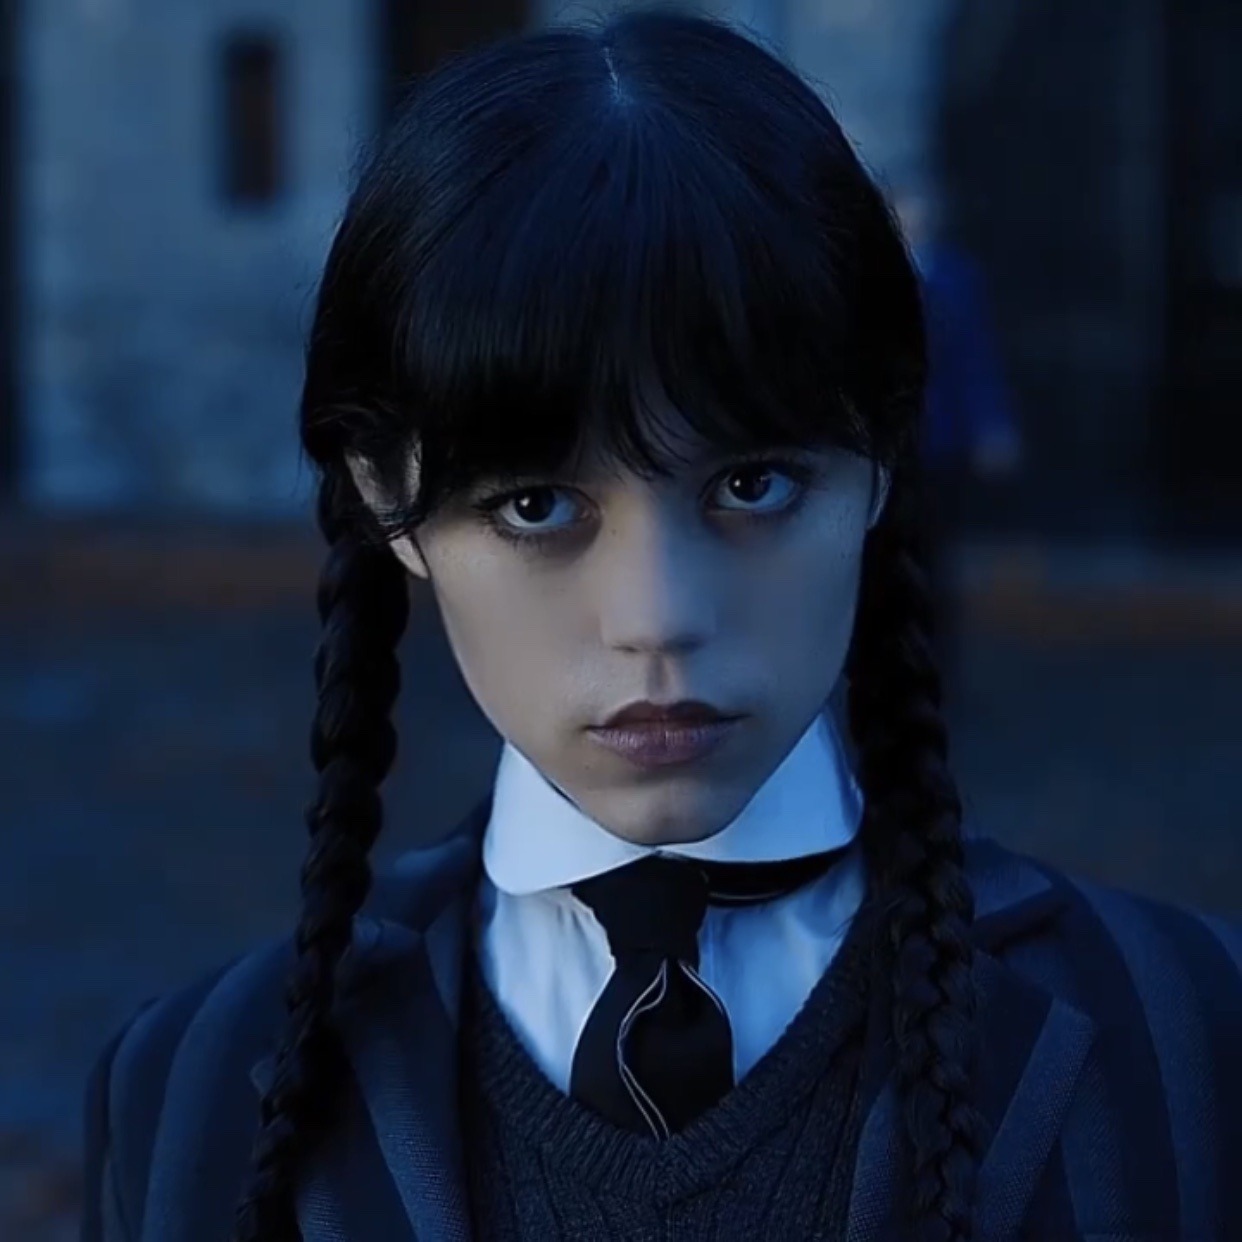 Wednesday Addams image for your profile picture, from Netflix Wednesday